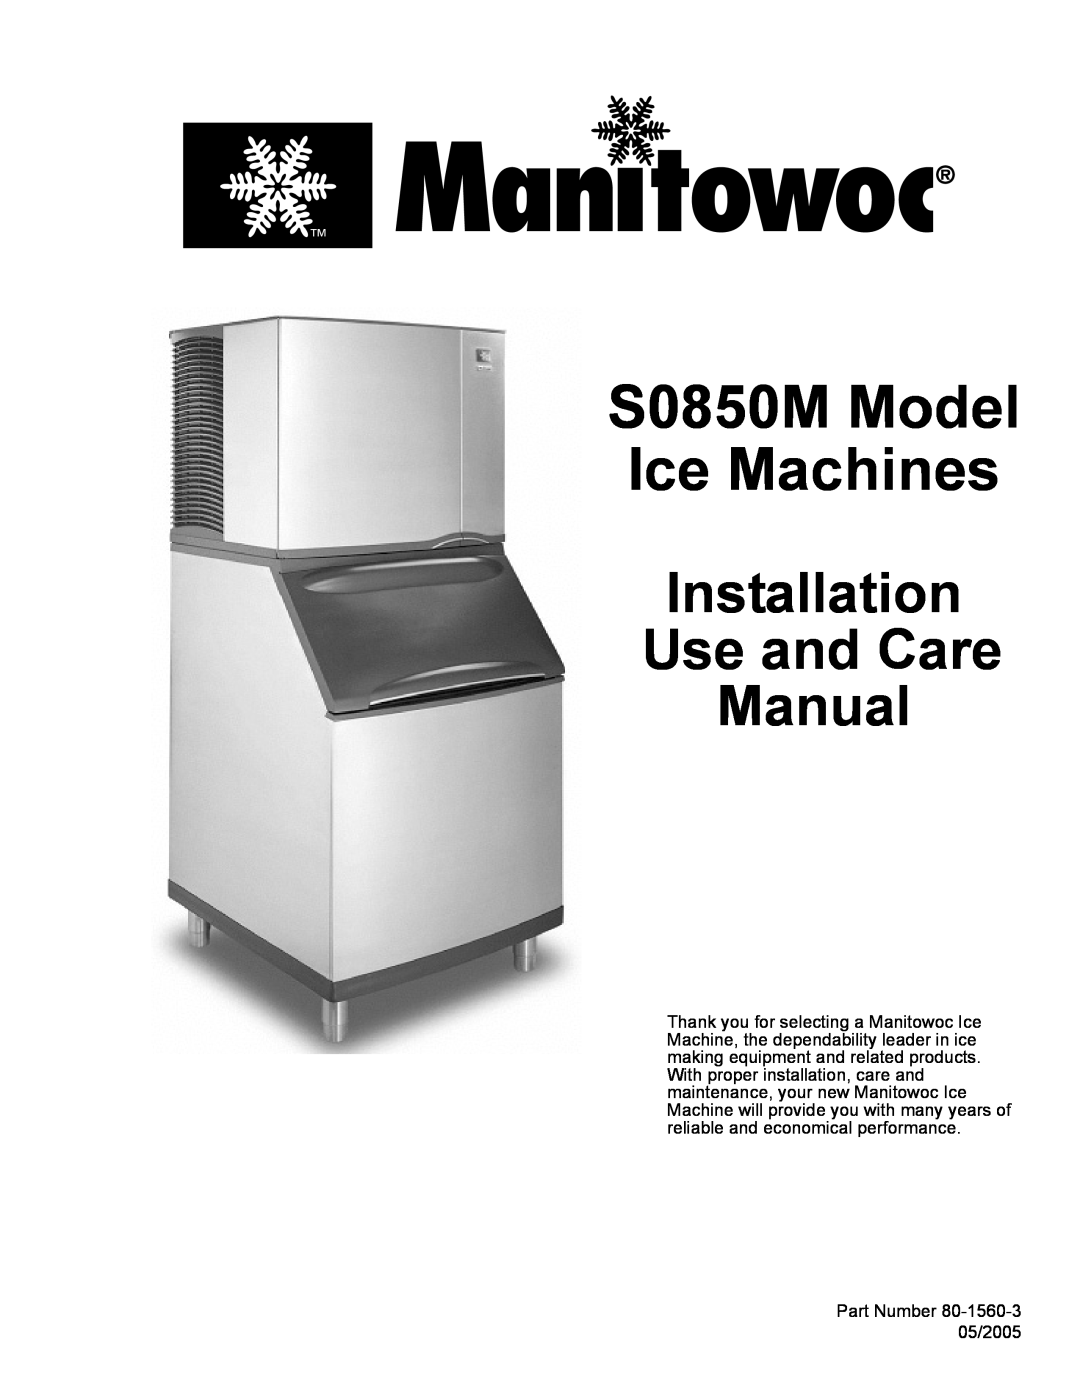 Manitowoc Ice manual S0850M Model Ice Machines, Installation Use and Care Manual 